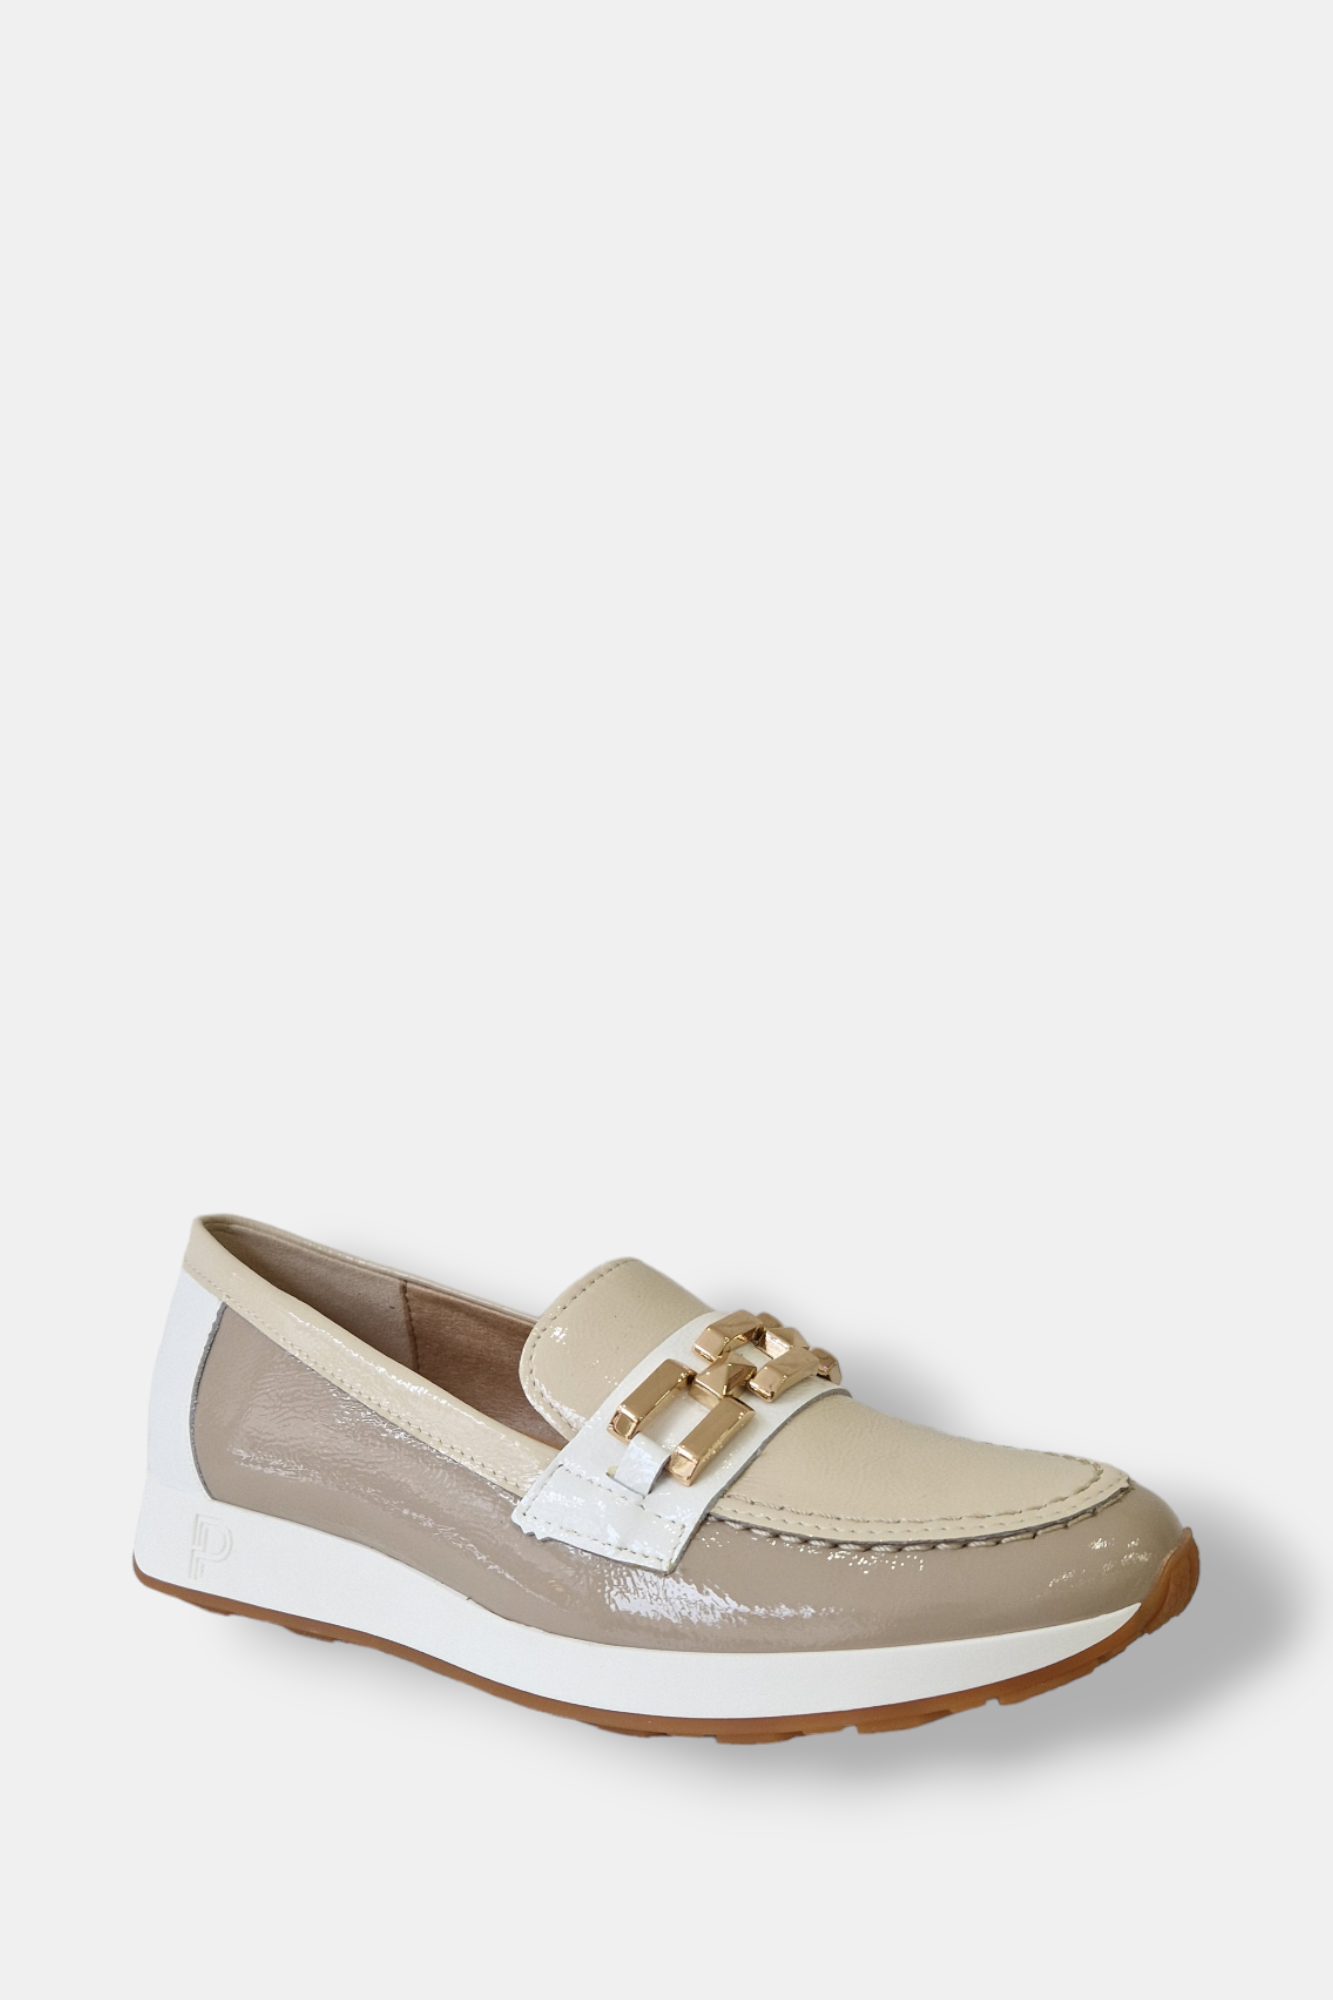 PITILLOS 5675 TAUPE/WHITE PATENT LEATHER LOAFER